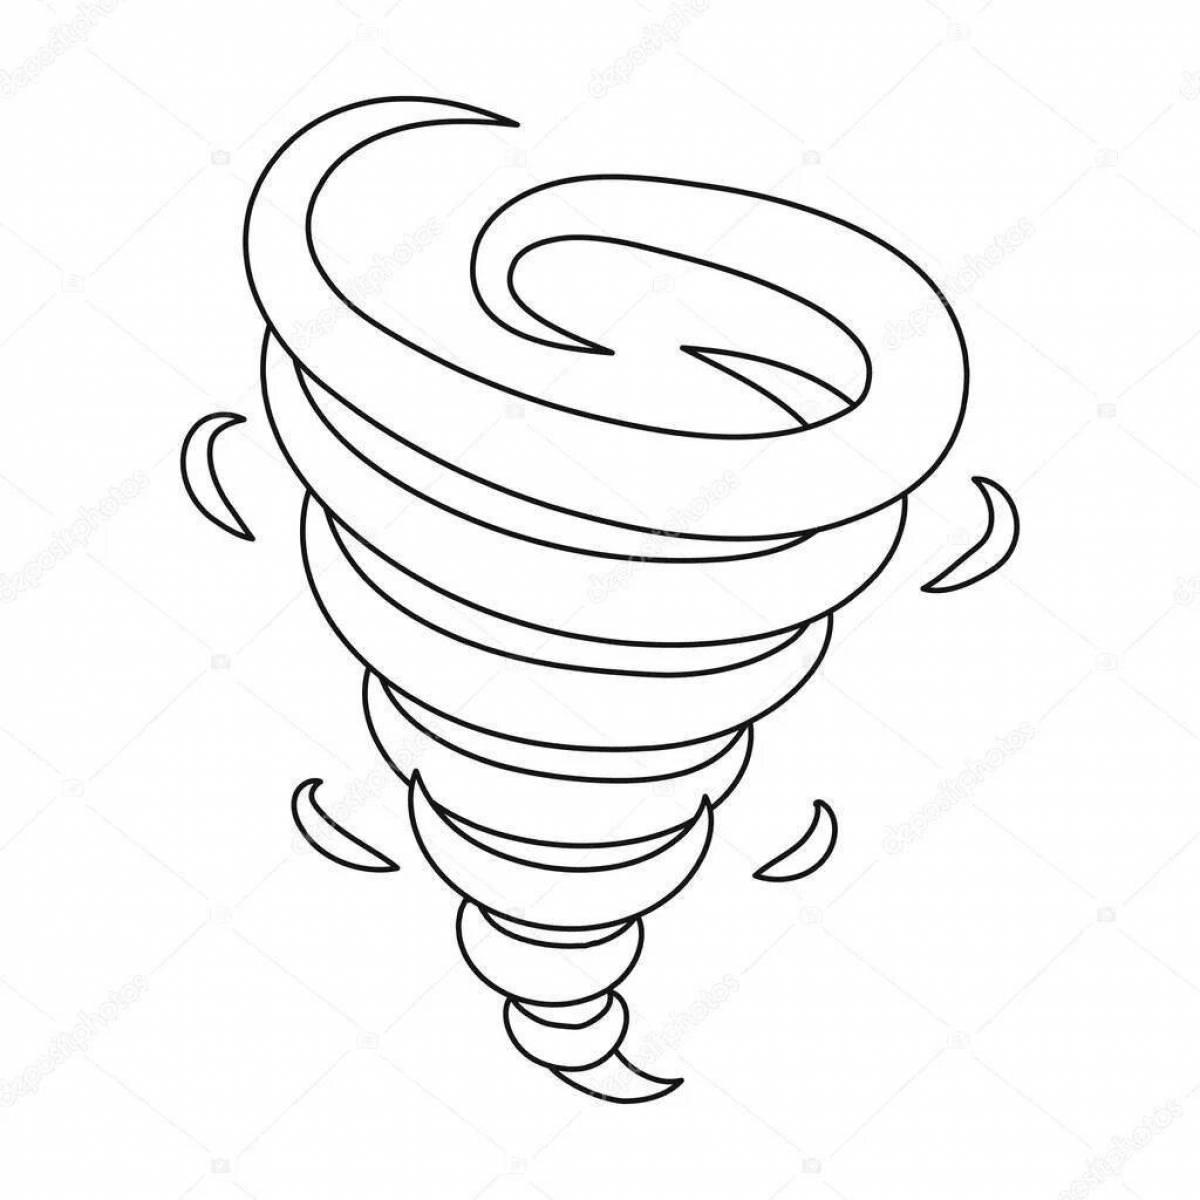 Detailed tornado coloring page